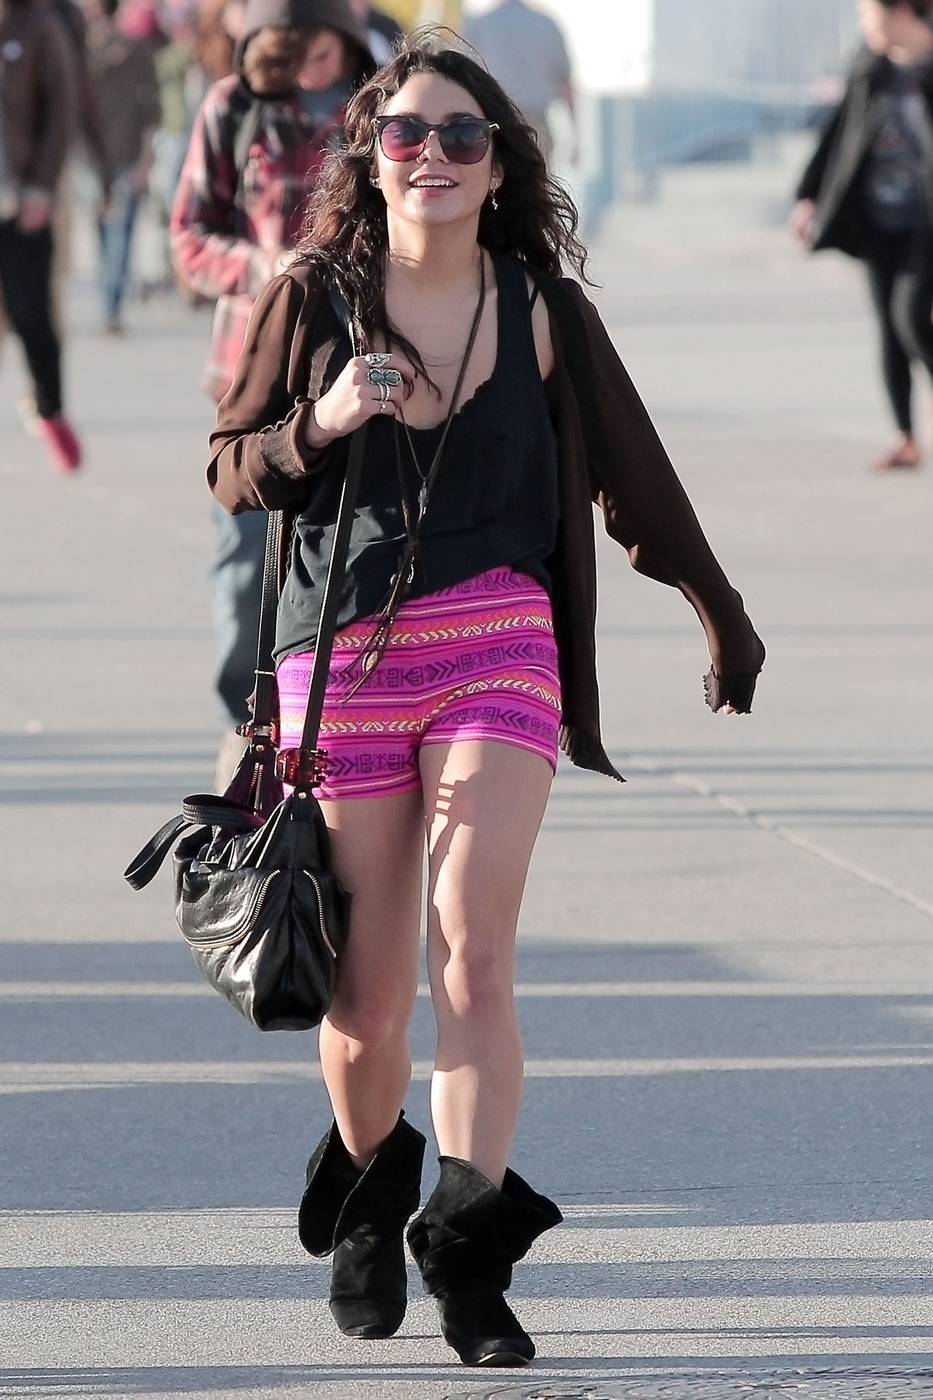 vanessa hudgens 13 years old. Hudgens will be portraying the role of Sam, 